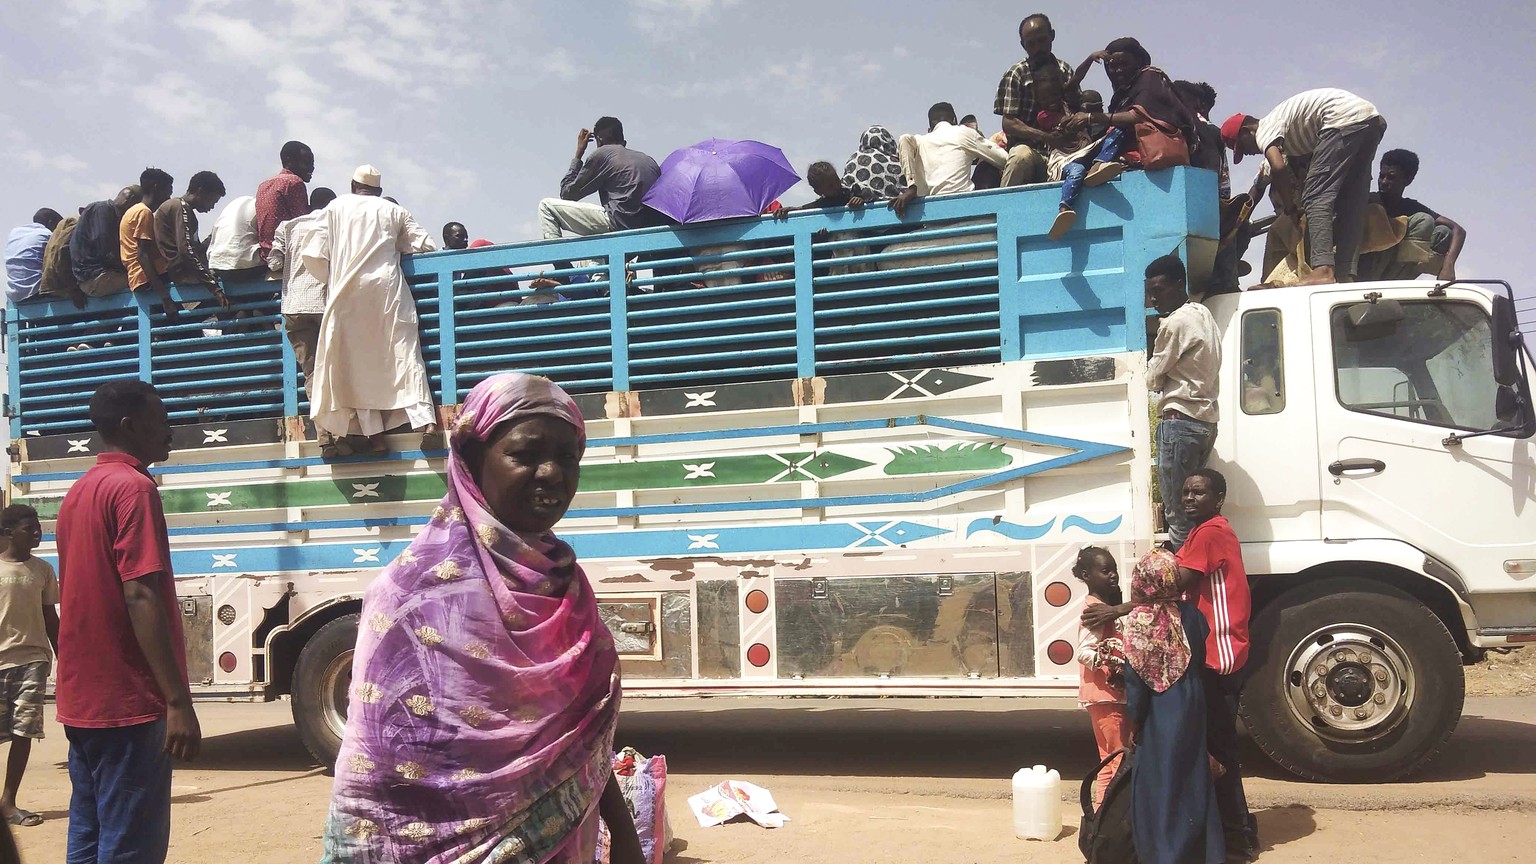 FILE - People board a truck as they leave Khartoum, Sudan, on June 19, 2023. A raging conflict in Sudan has driven more than 3.1 million people from their homes, including over 700,000 who fled to nei ...